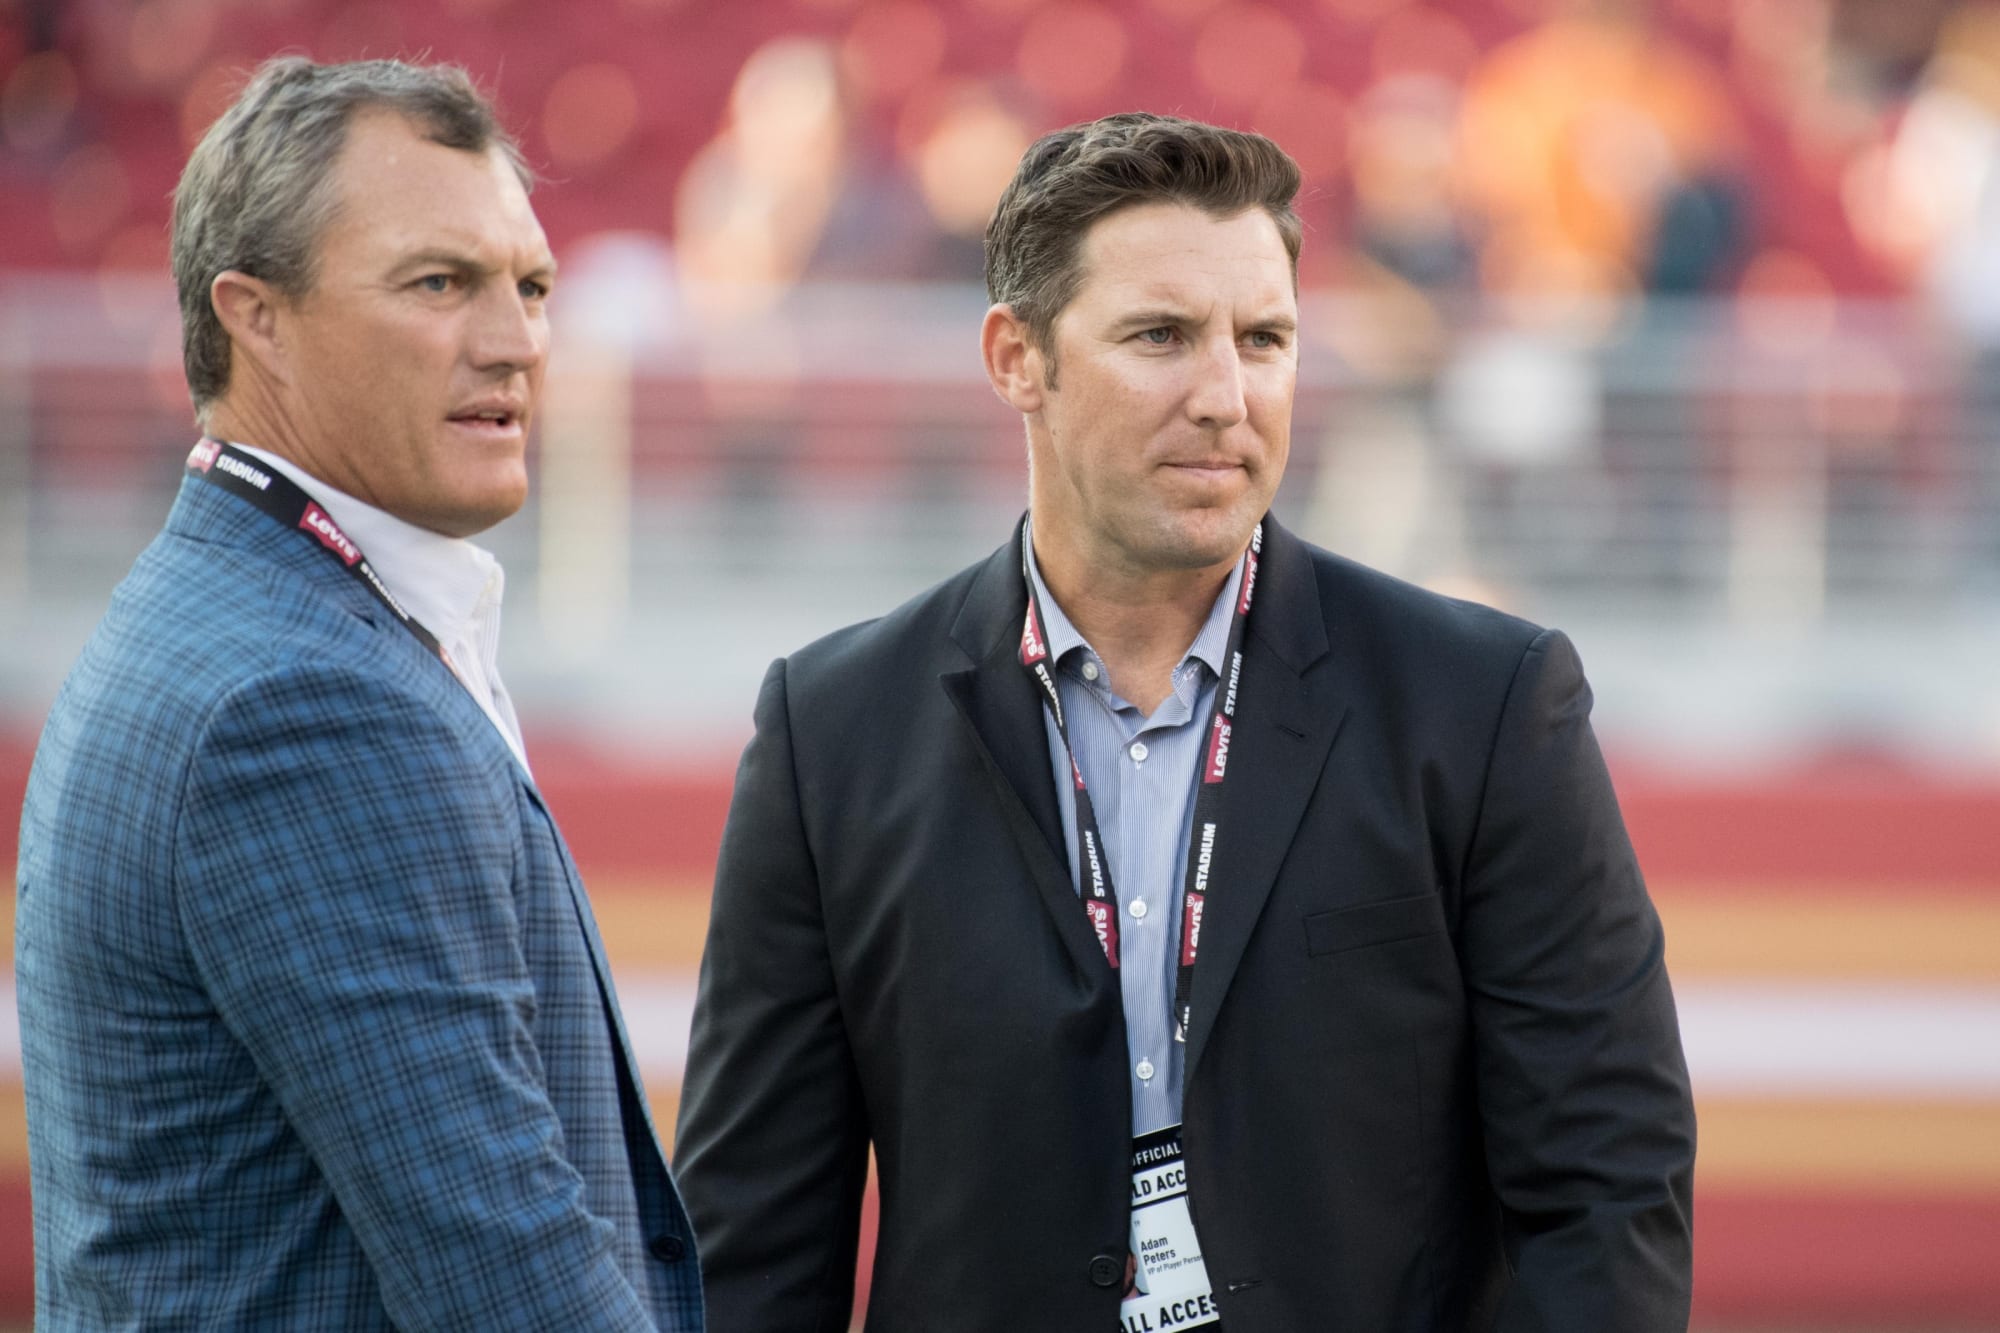 The Tennessee Titans are interviewing six external GM candidates